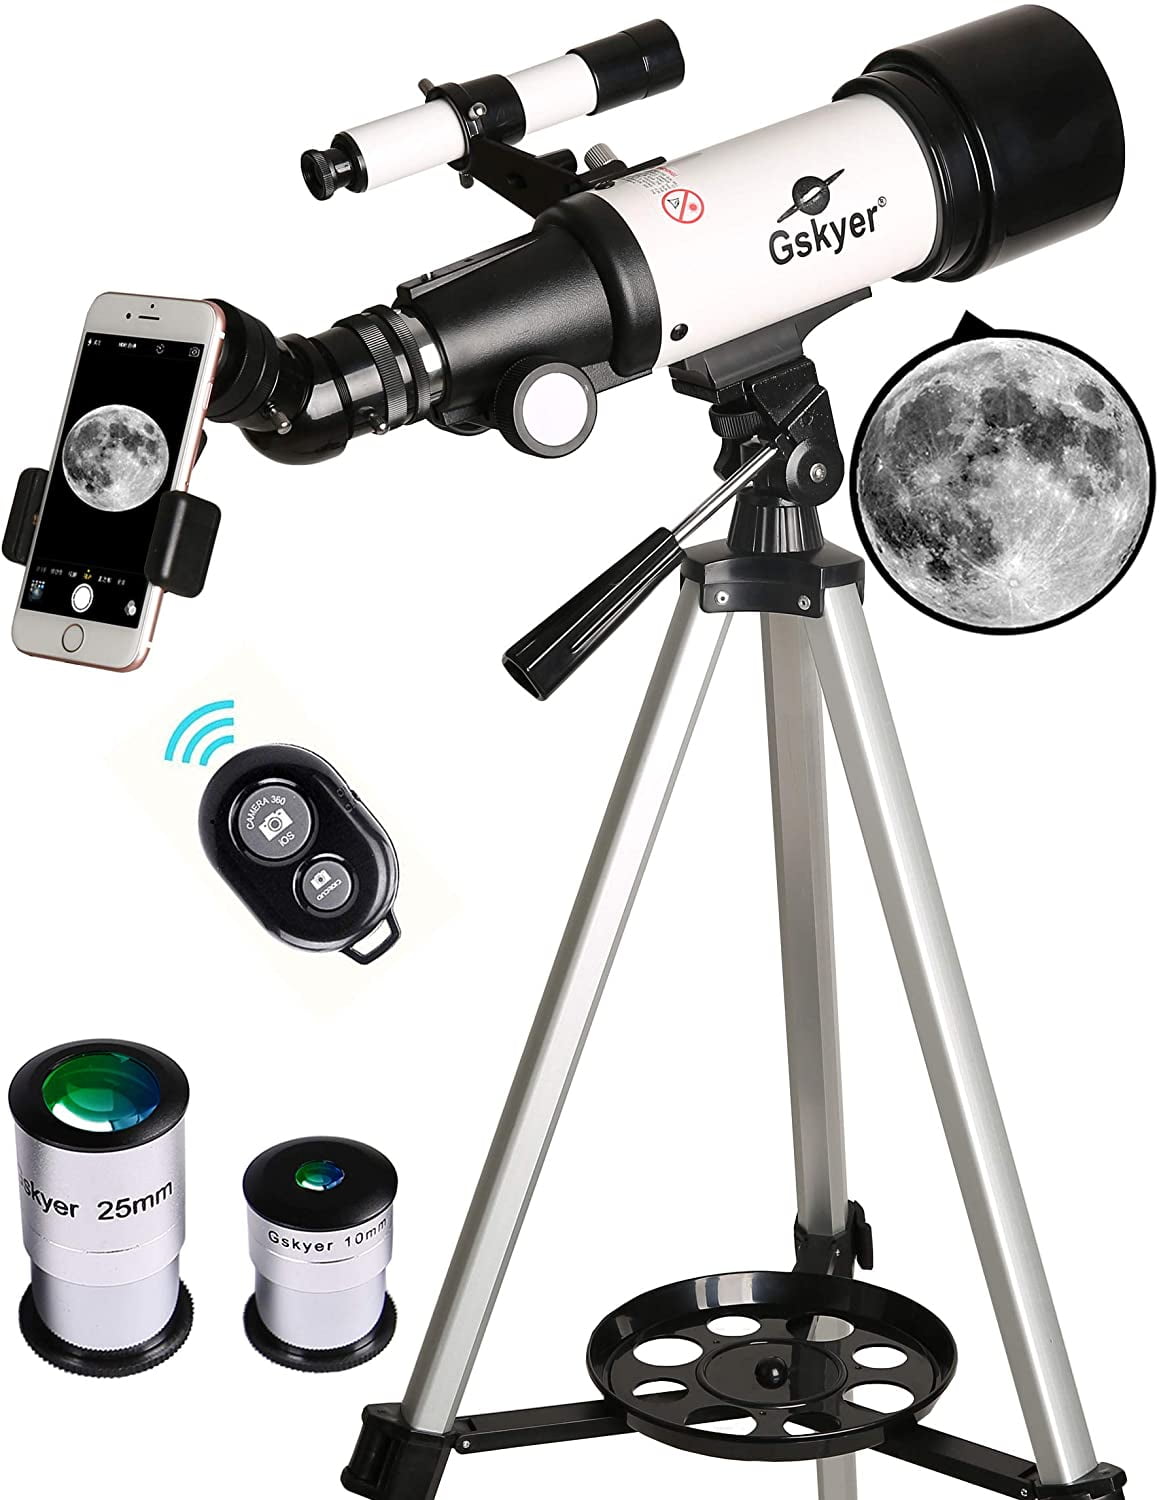 Barlow Lens Backpack 70mm Aperture Refractor Telescope for Astronomy with Tripod Telescope for Kids Adults Astronomy Beginners Two Eyepieces Smartphone Adapter 